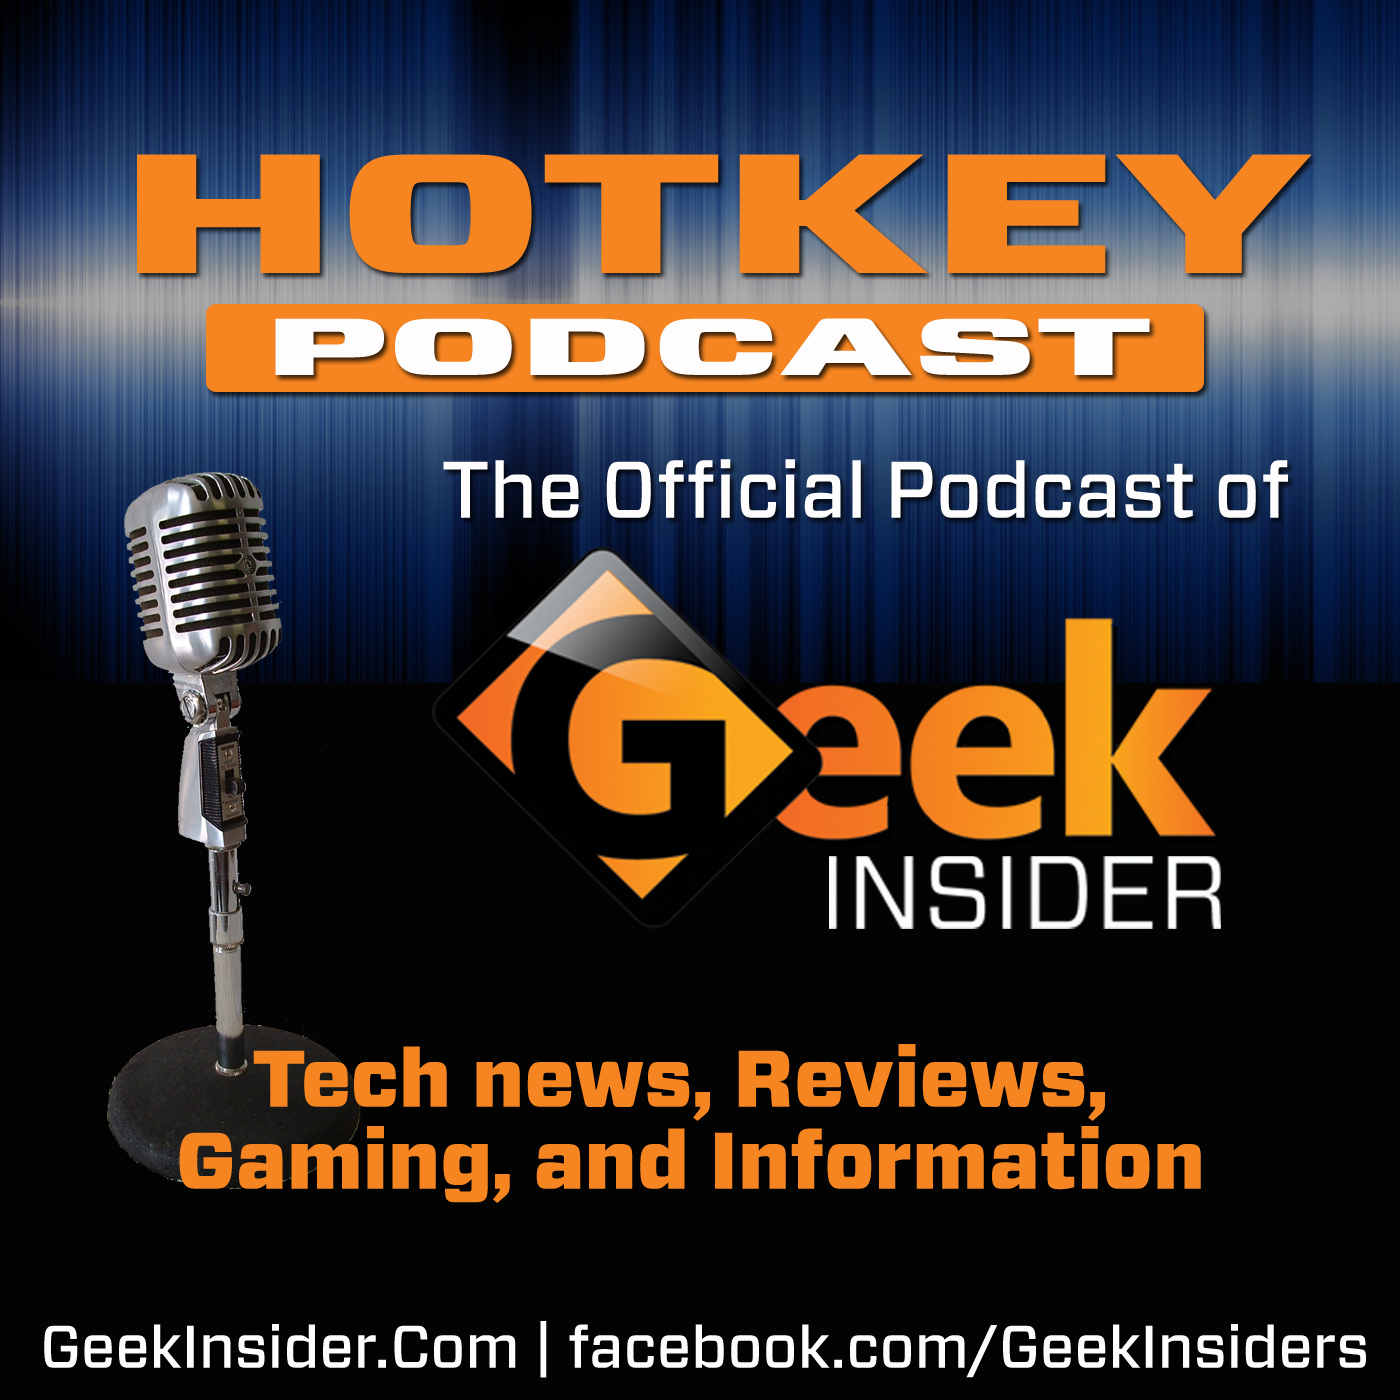 Geek insider, geekinsider, geekinsider. Com,, hotkey: the official podcast of geek insider #3 - 8. 28. 13, podcasts